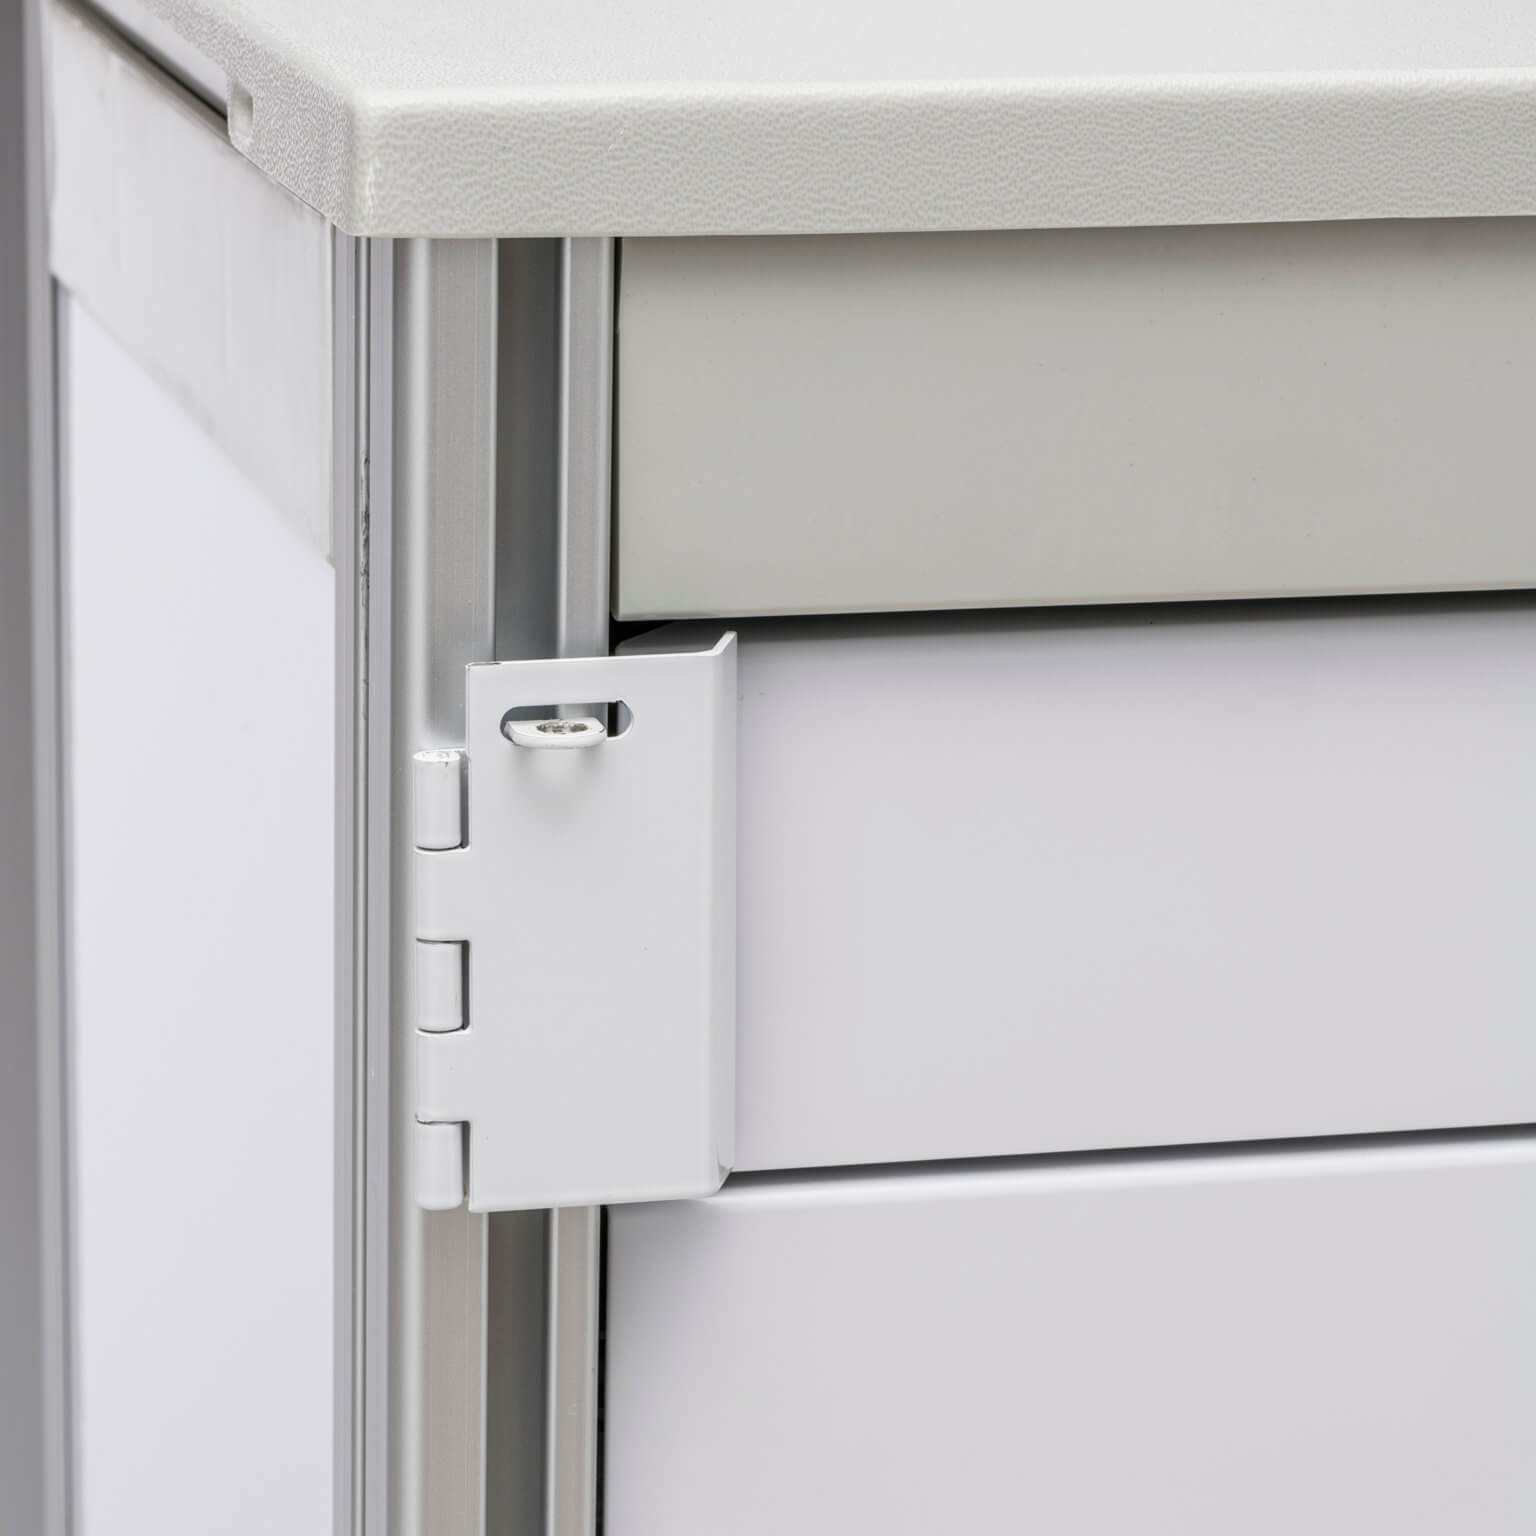 Breakaway Lock Bar | Accessory for Medical Carts | InnerSpace Healthcare